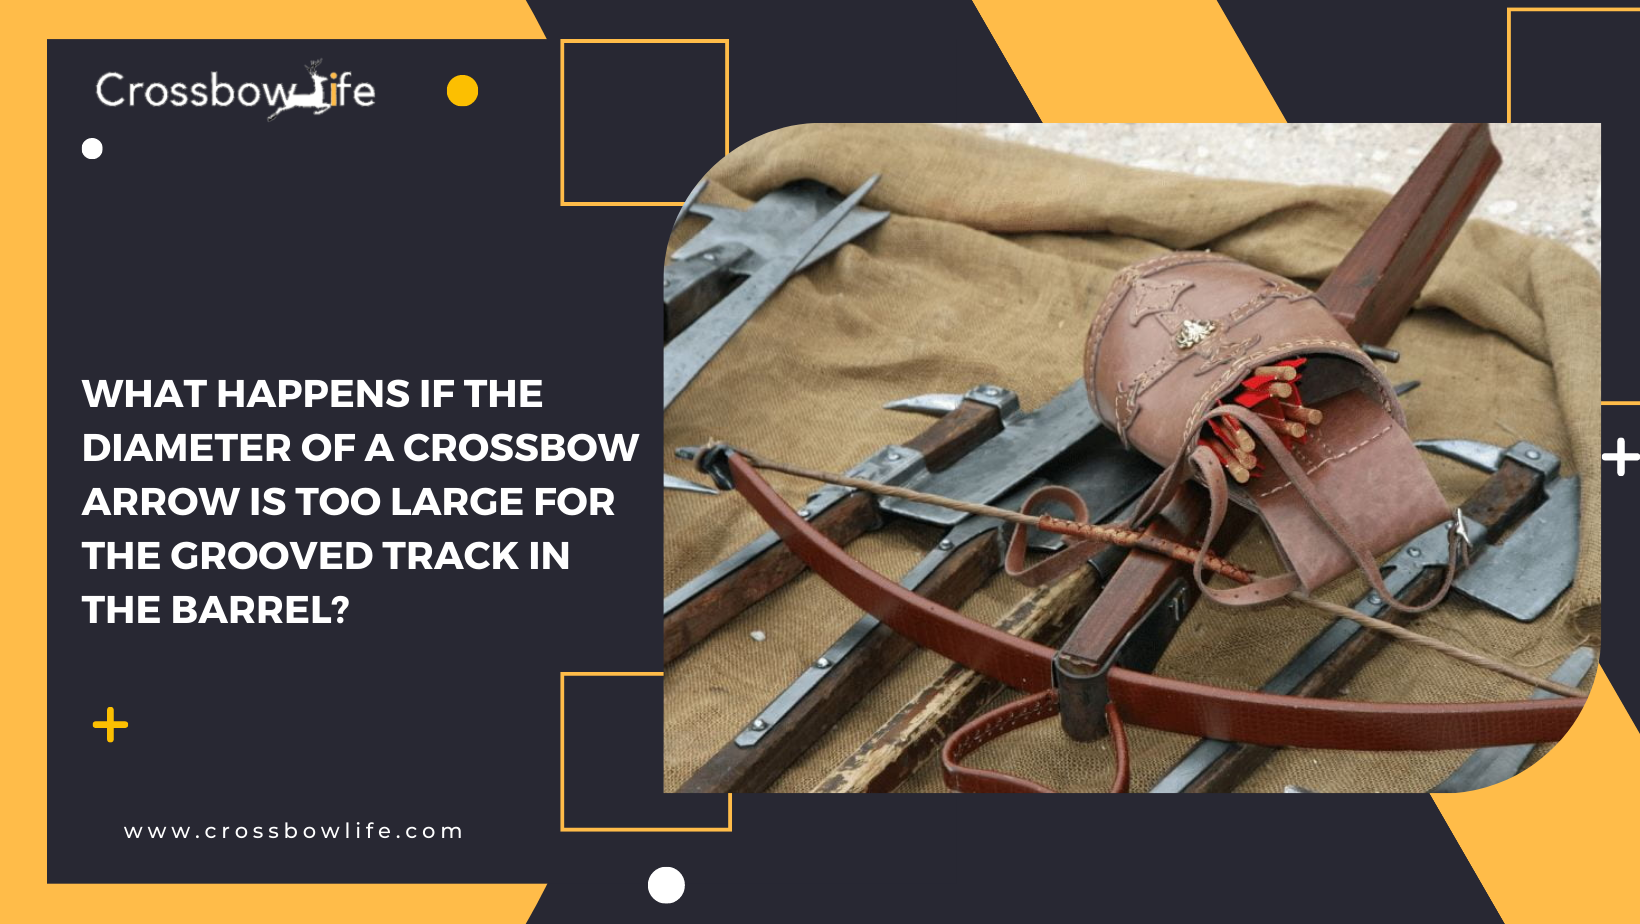 What Happens If The Diameter of a Crossbow Arrow Is Too Large for the Grooved Track in The Barrel?